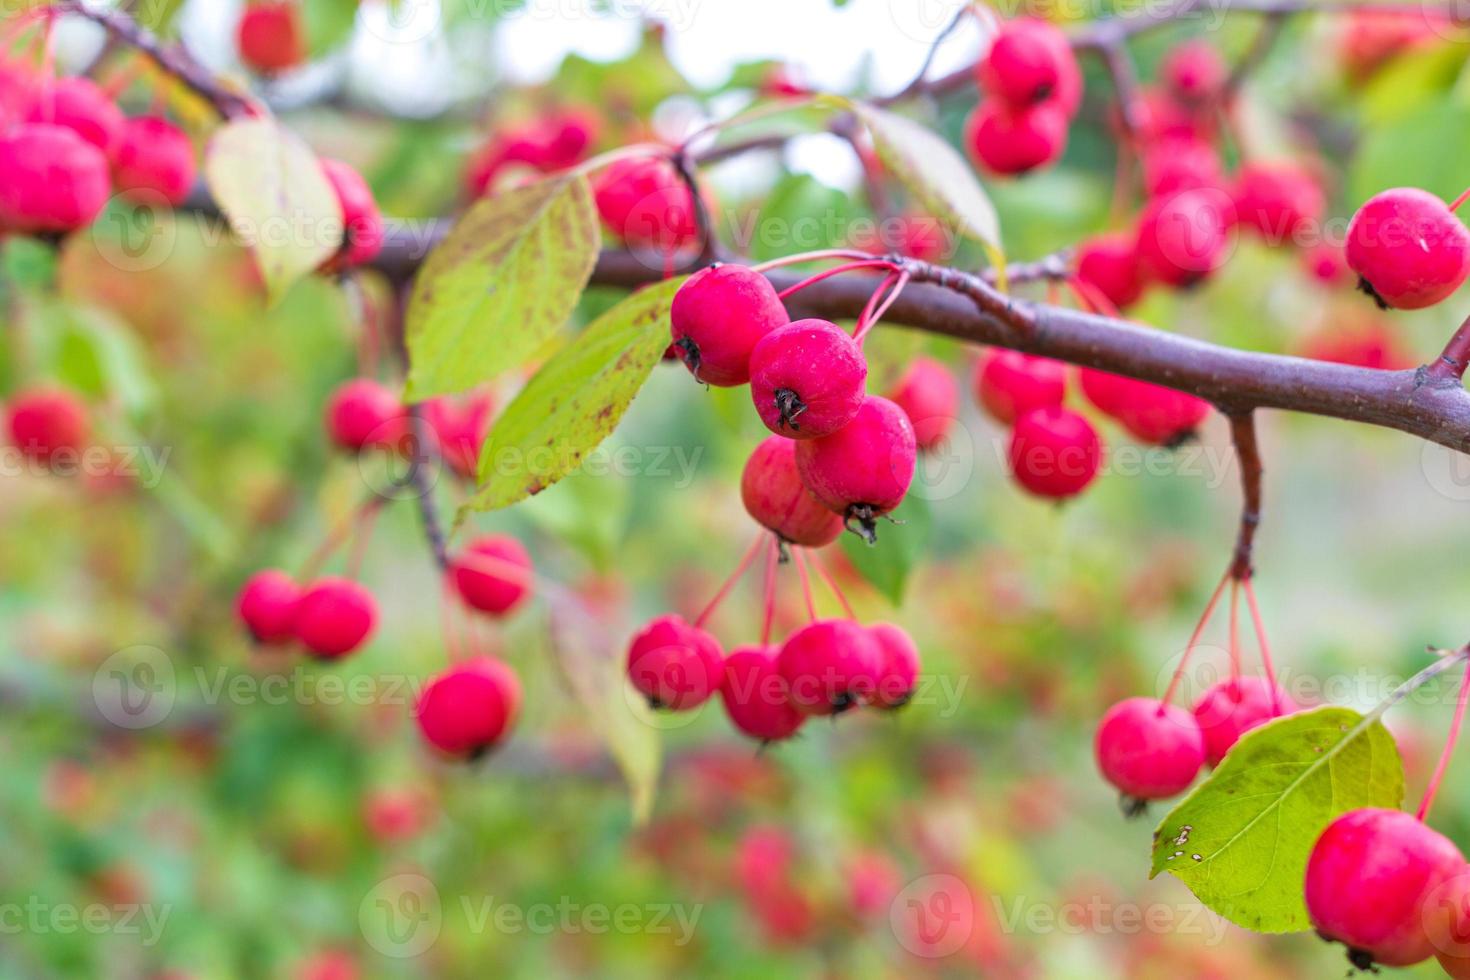 Ripe wild apples on a branch photo